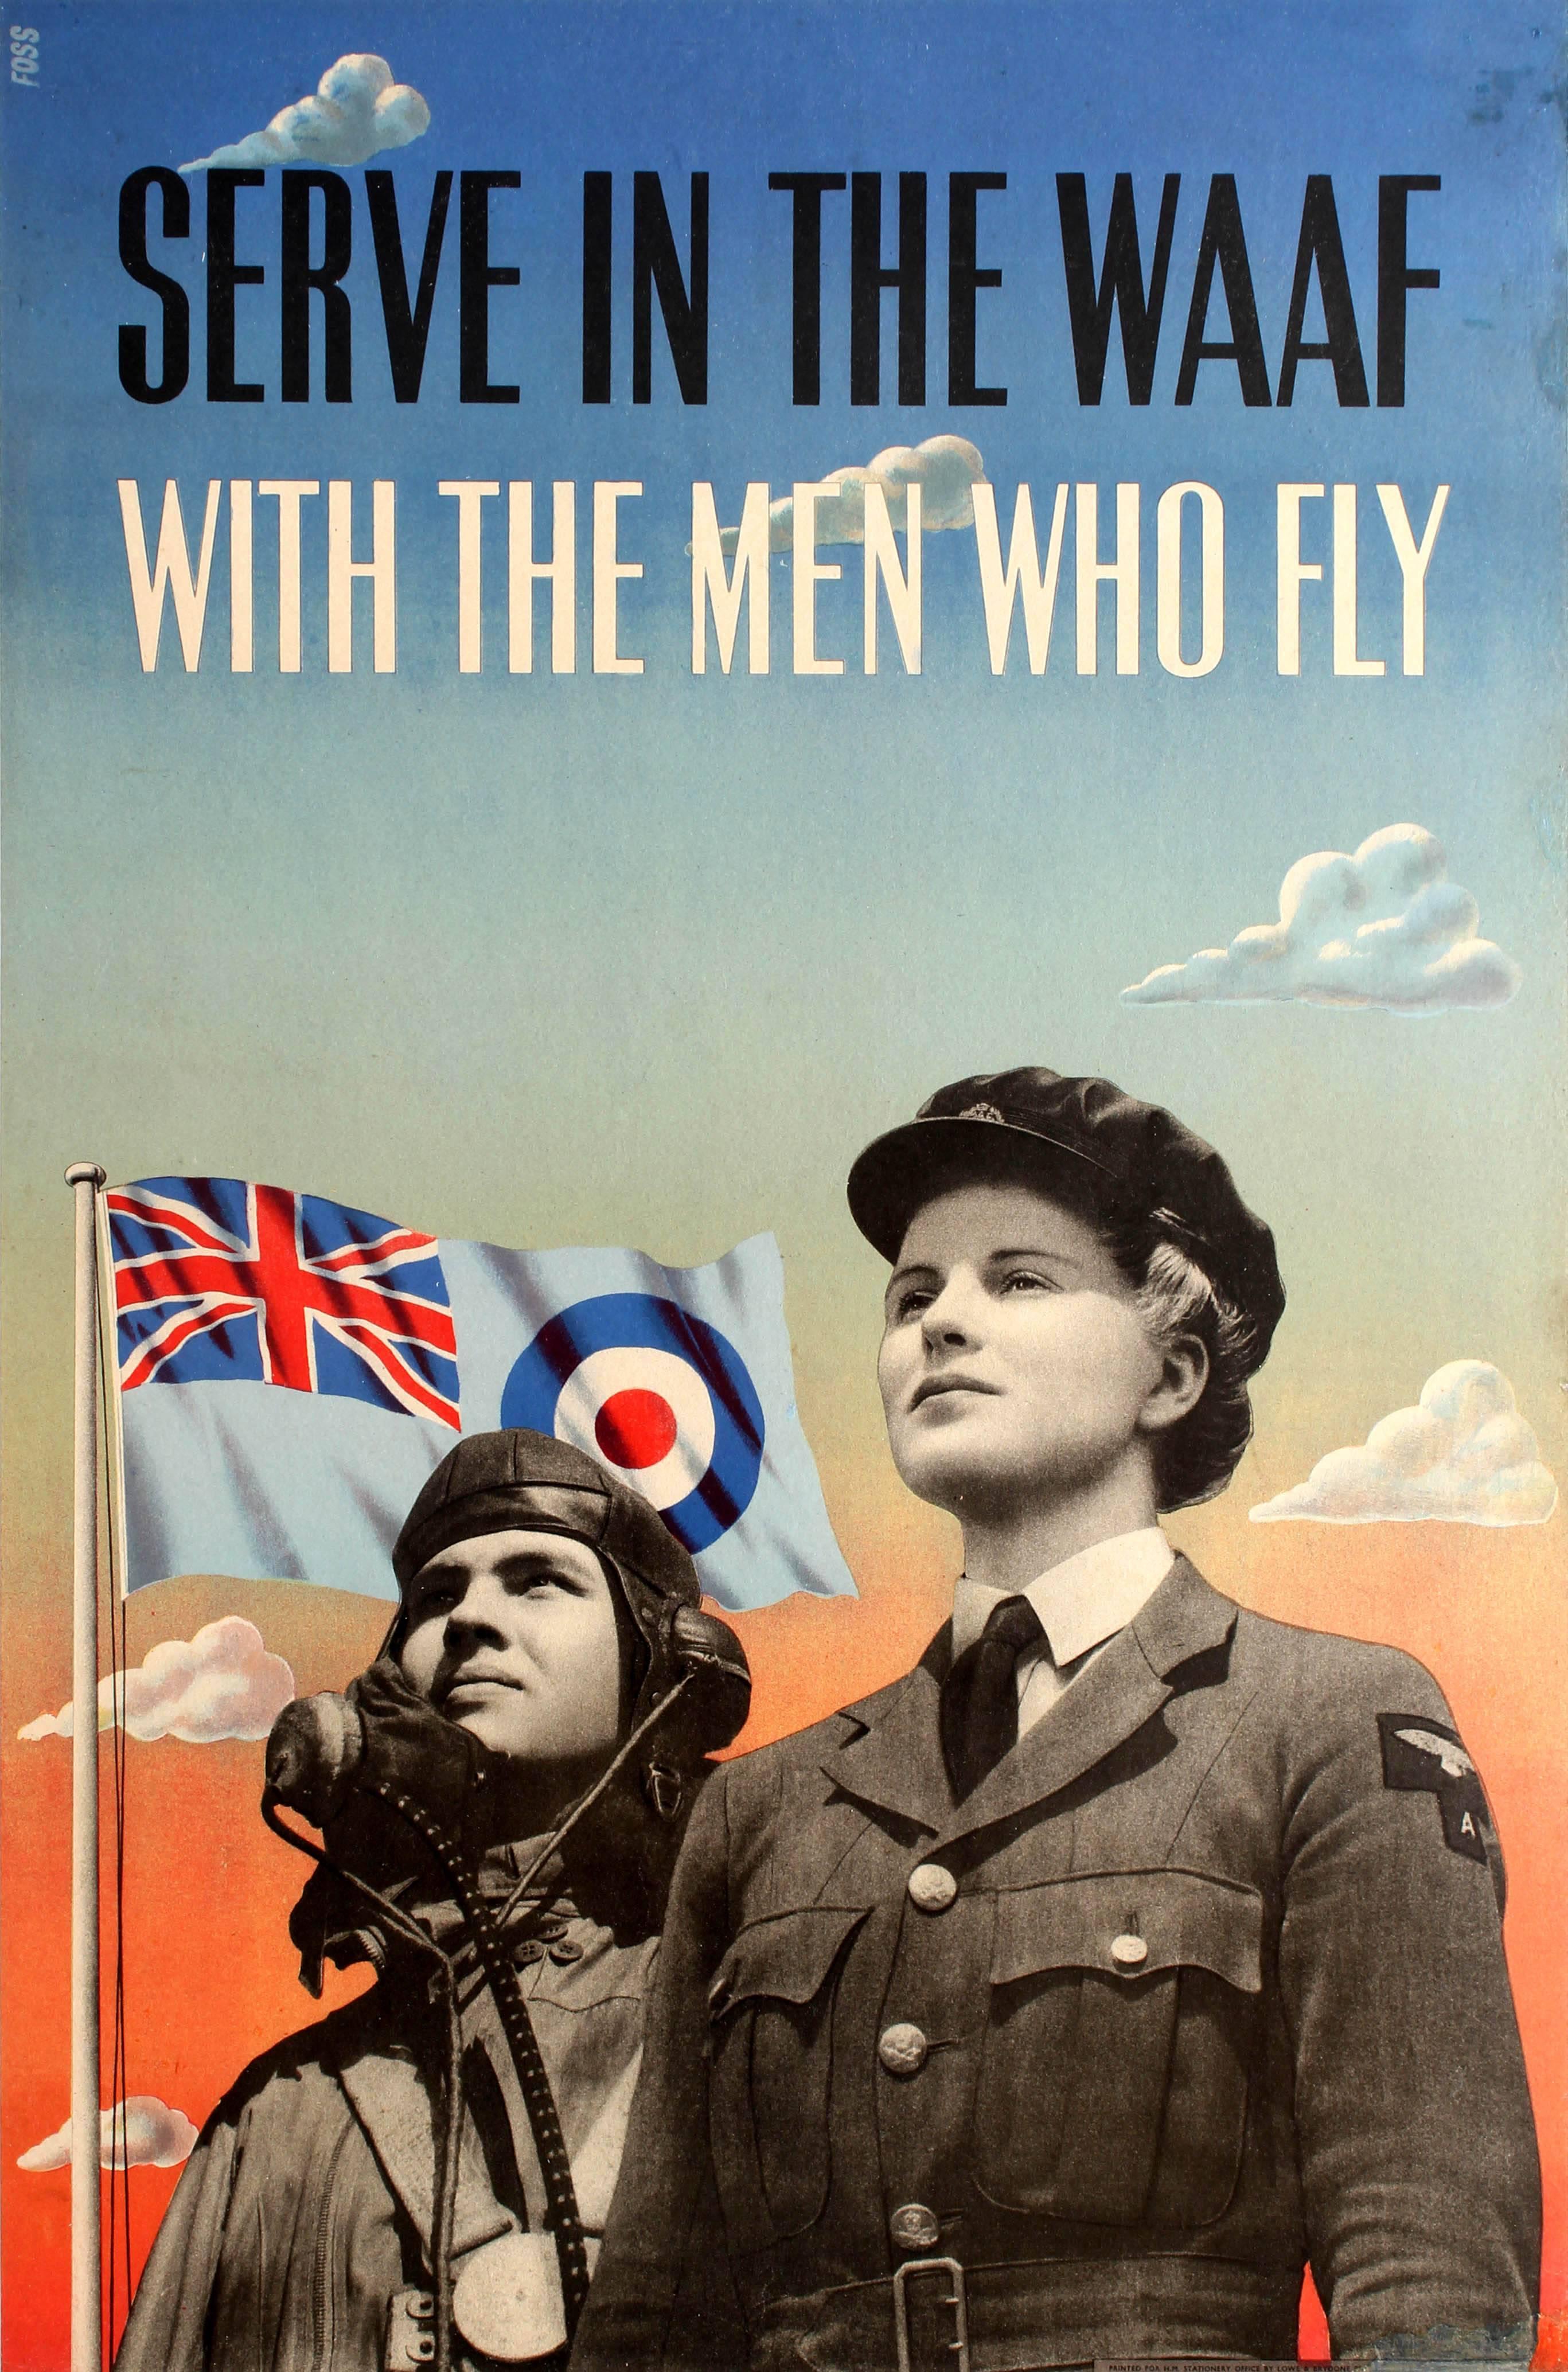 Jonathan Foss Print - Original WWII Royal Air Force Poster - Serve In The WAAF With The Men Who Fly